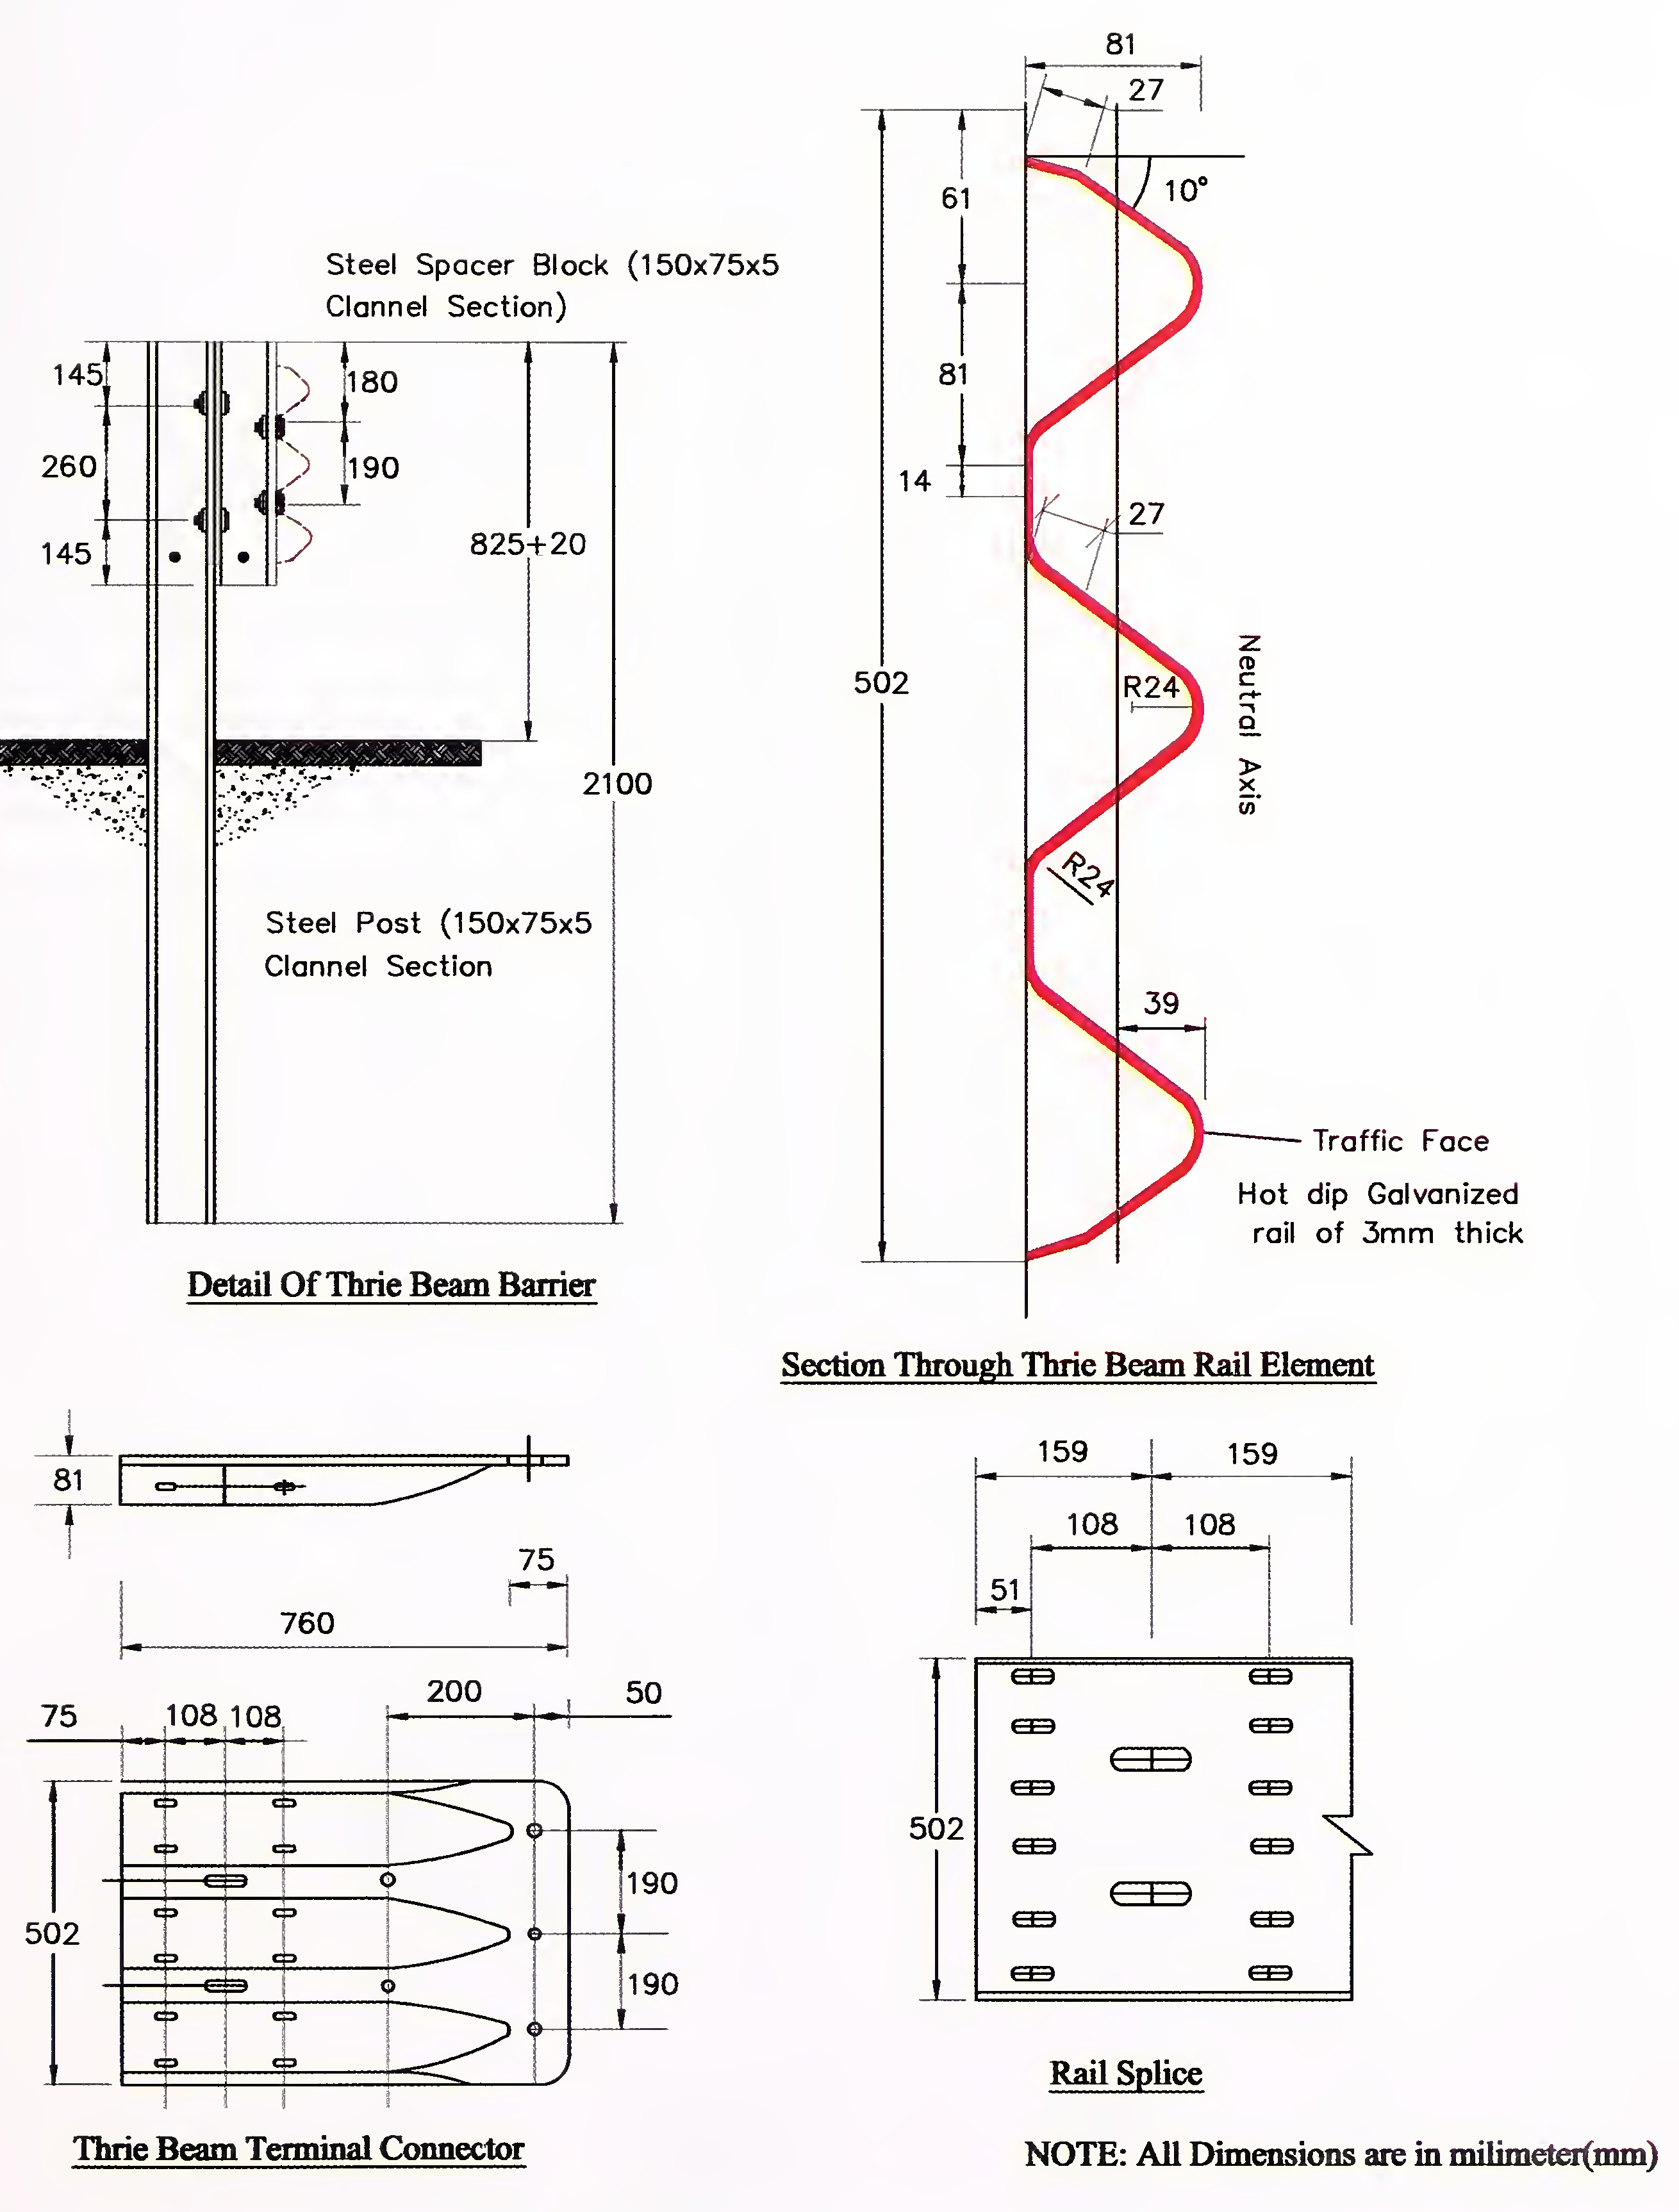 Fig. 10.15 Typical Details of Thrie Beam Structural Elements